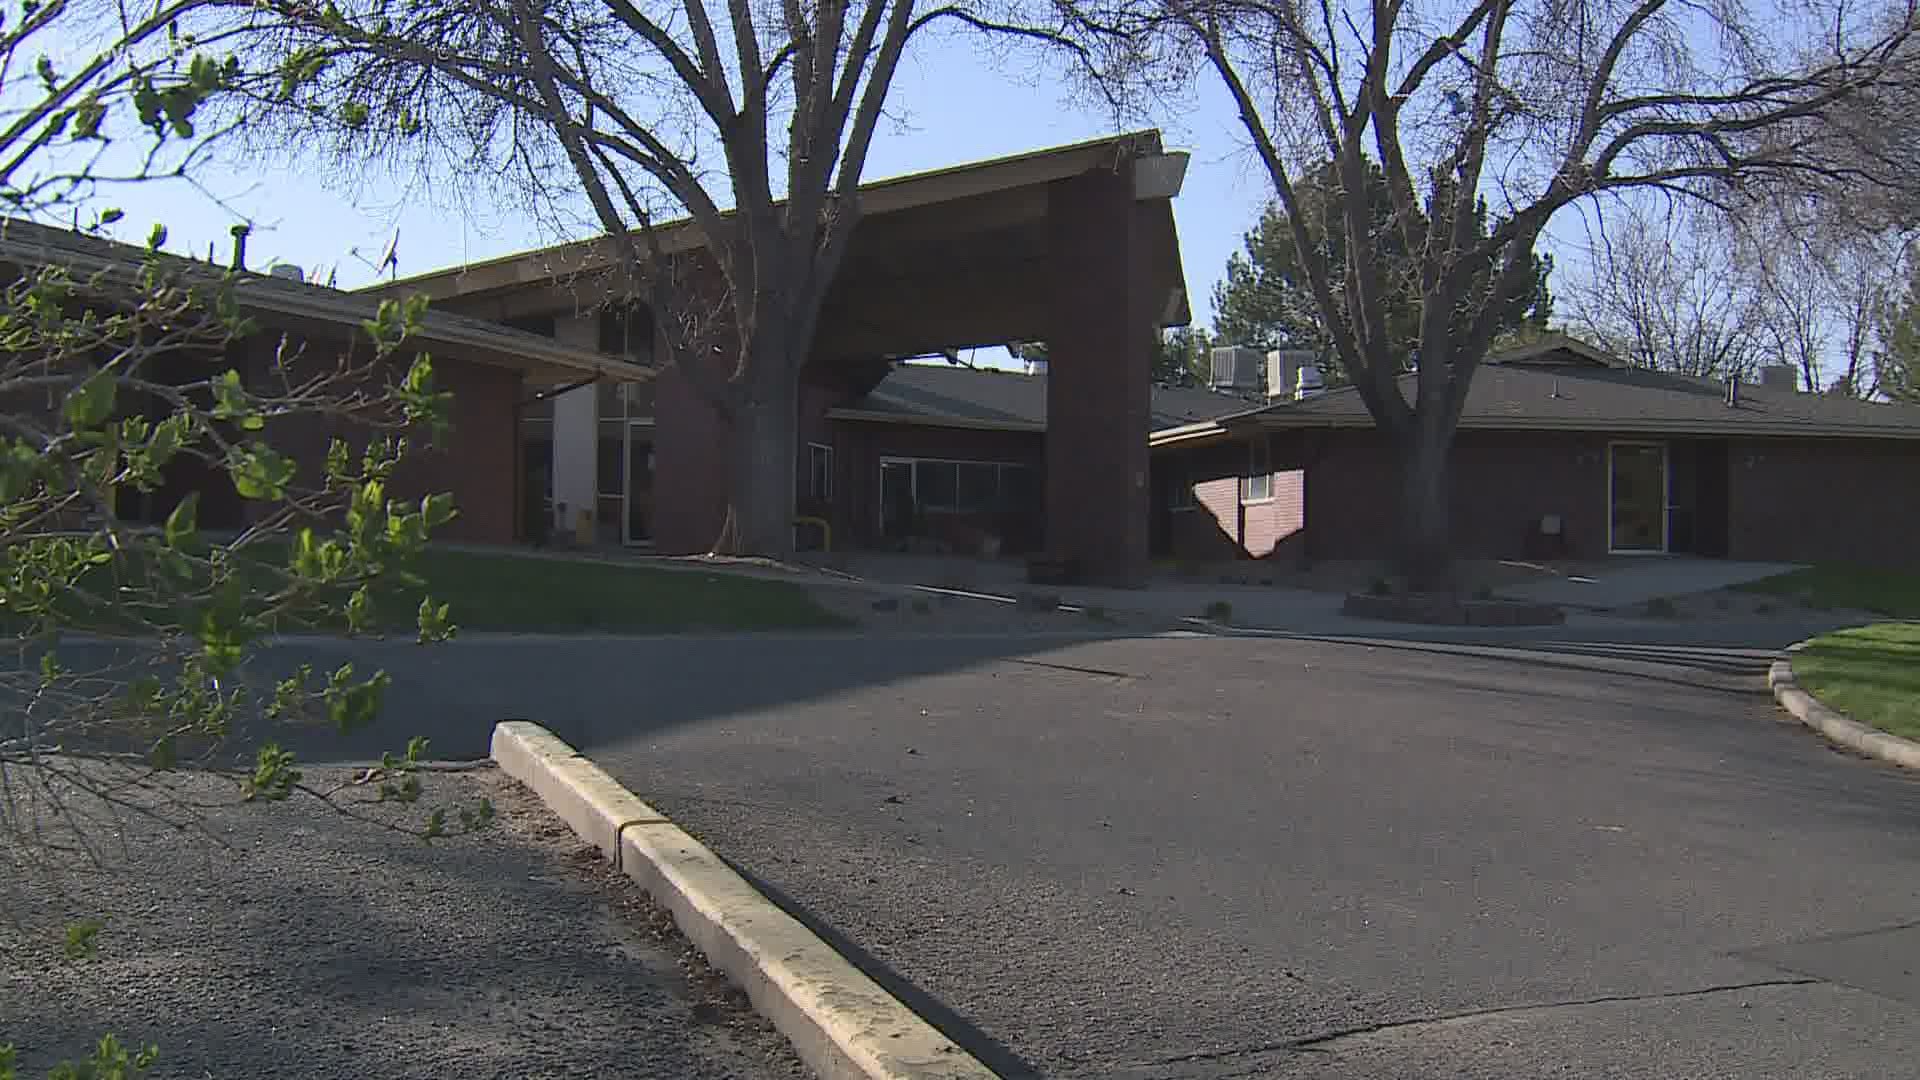 15 surviving residents at Centennial Healthcare Center have also tested positive for the novel coronavirus.